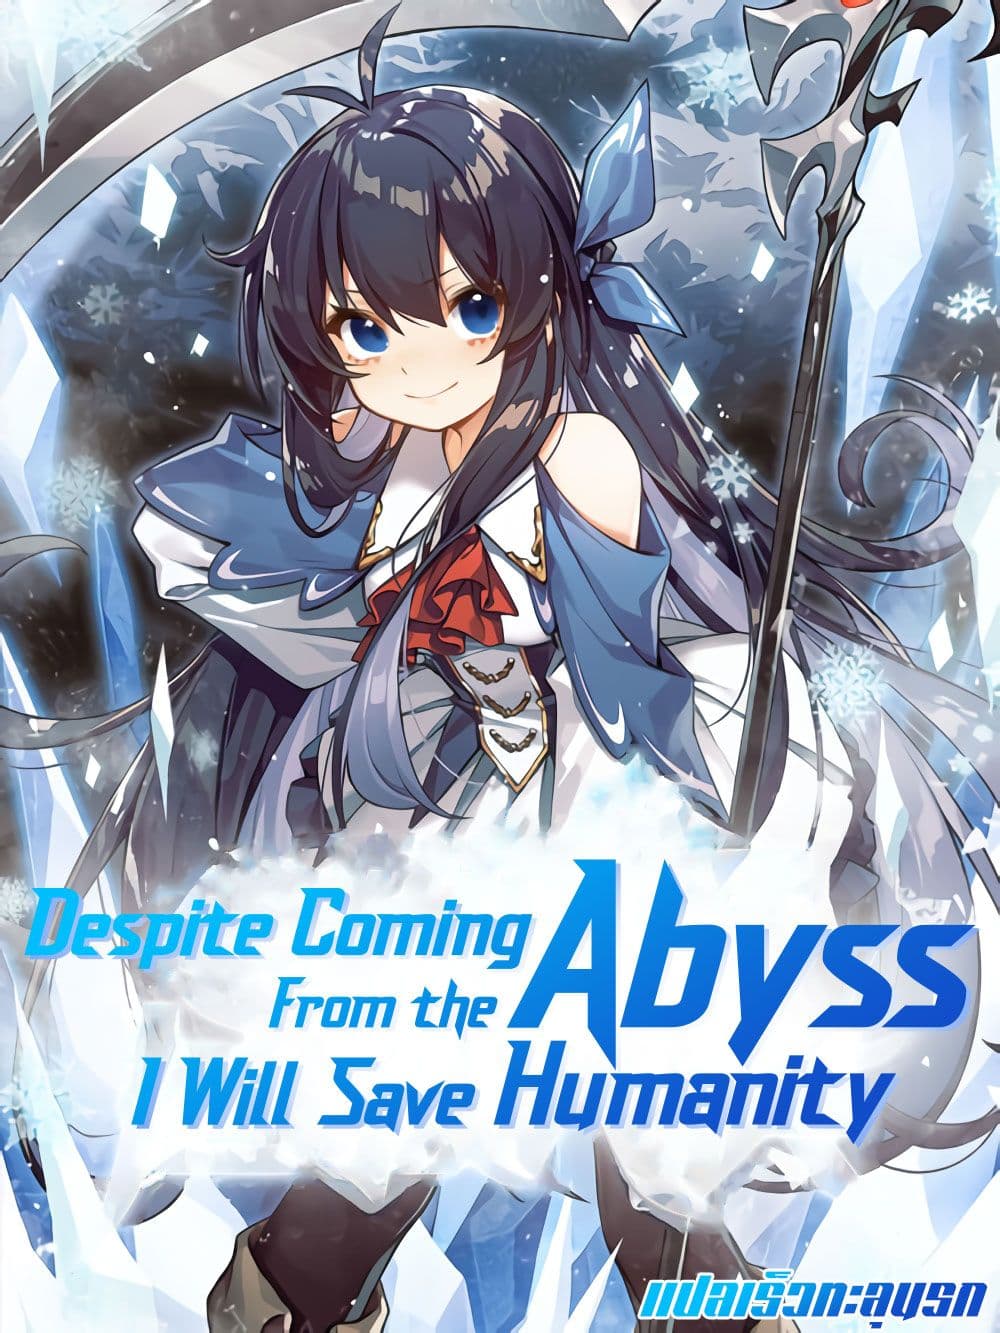 Despite Coming From the Abyss, I Will Save Humanity 23-23